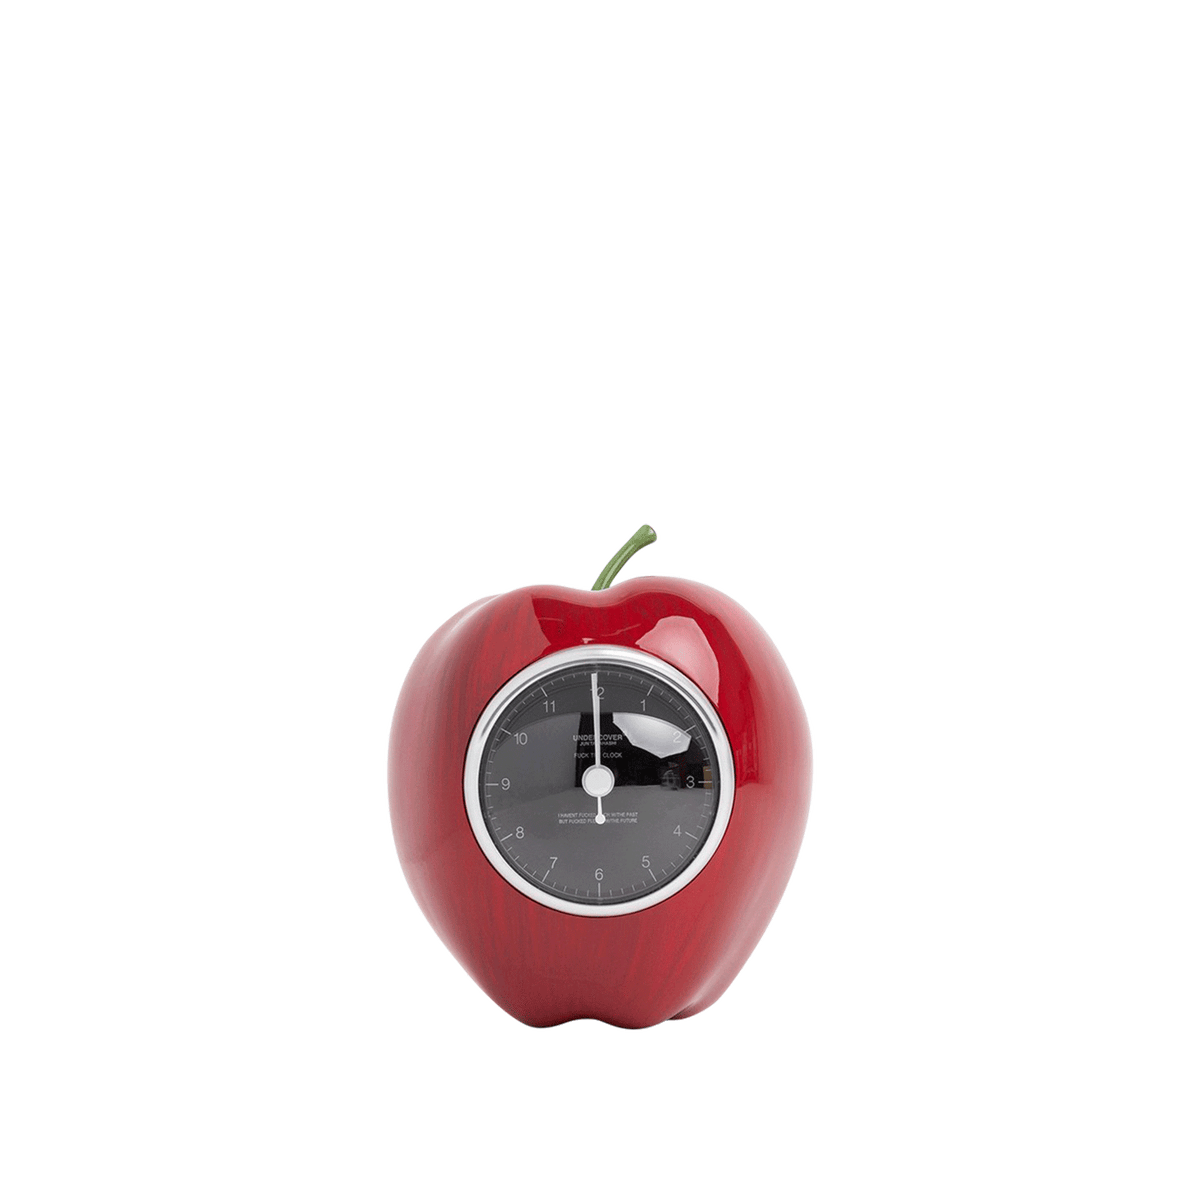 Undercover Gilapple Clock - Red